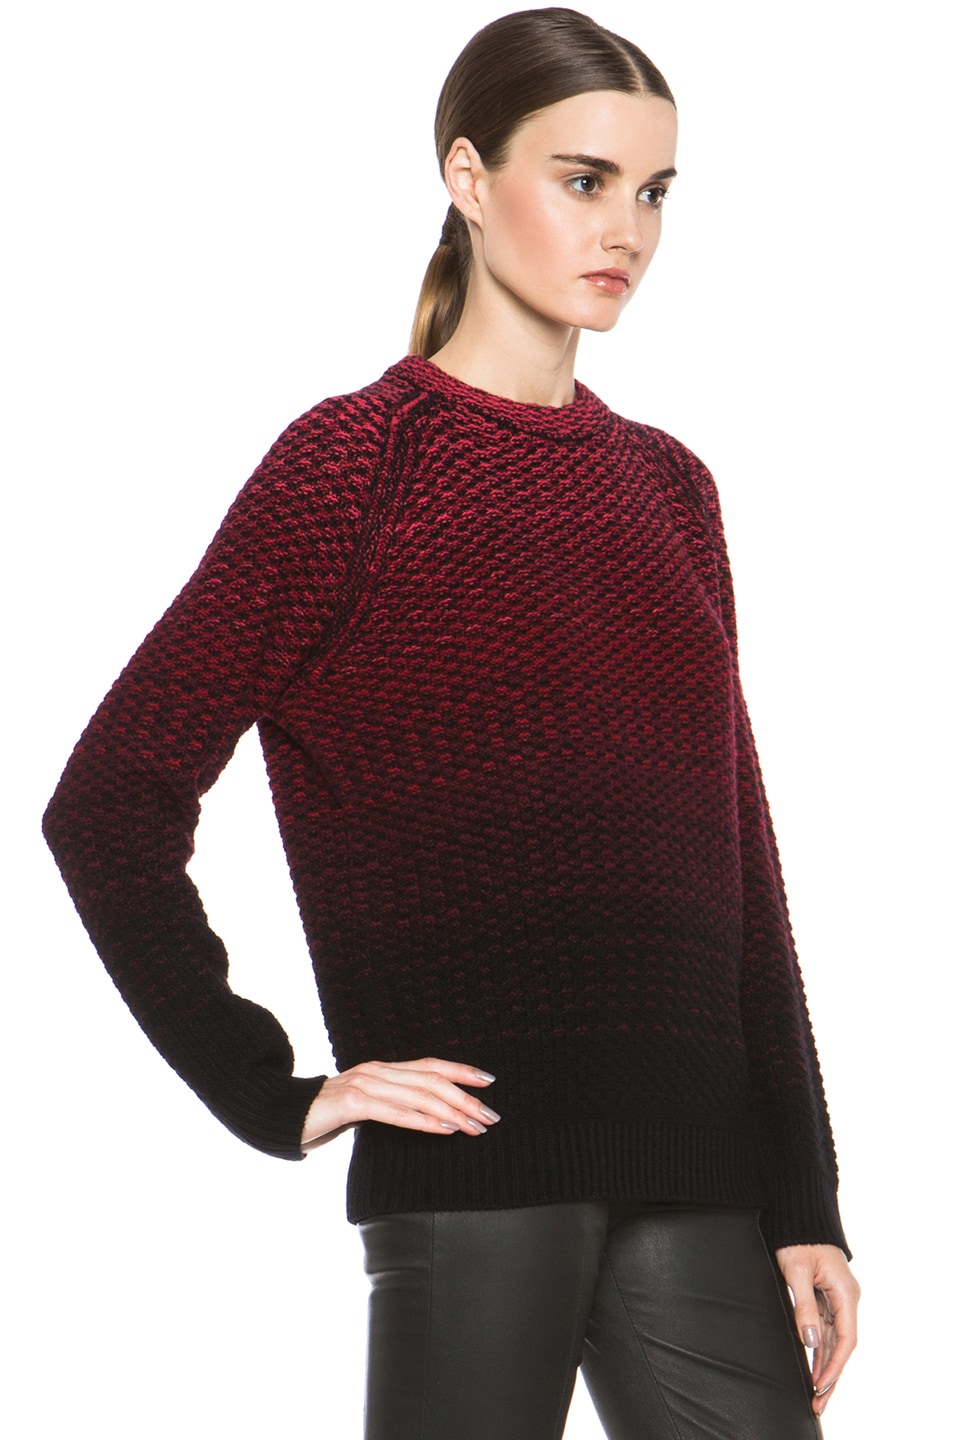 Proenza Schouler Wool Cashmere Sweater in Red Ombre | FWRD